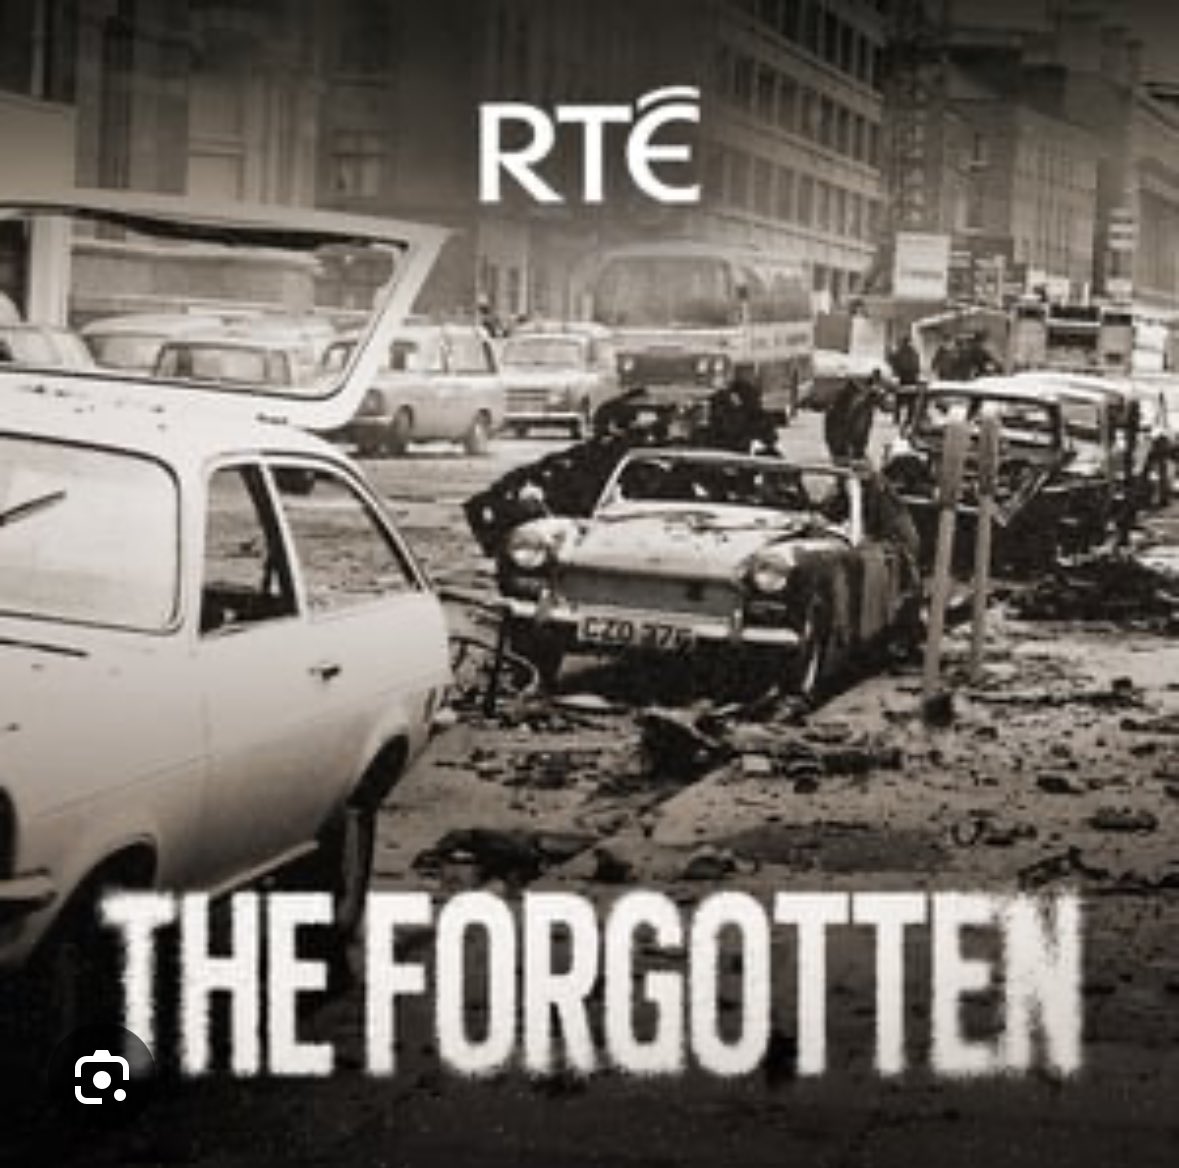 Special six part series marking the 50th anniversary of the Dublin Monaghan bombings starting on @RTERadio1 tomorrow with @ciaranoconnor and myself 6 parts - May 7/8/9 & again 13/14/15 ahead of anniversary on May 17th Also available wherever you get your podcasts!